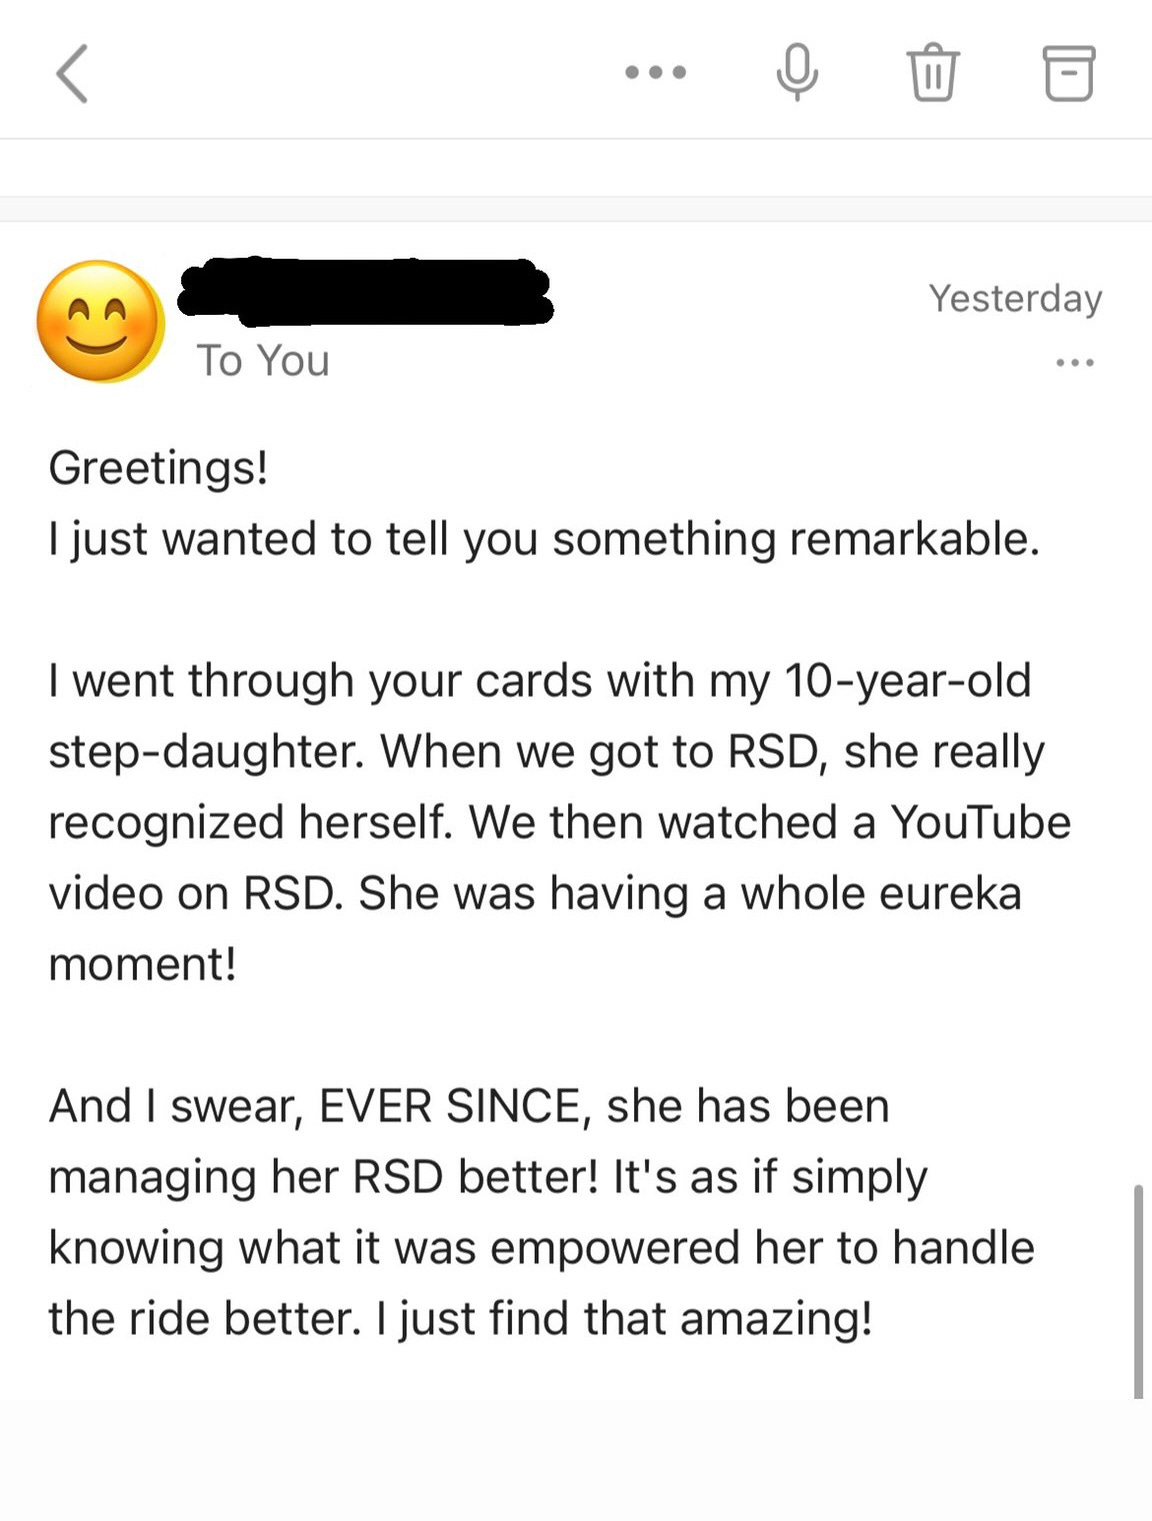 An email I received from a woman who said the ADHD flashcard, mainly the description card on RSD led to her 10 year old learning more about RSD on YouTube and she’s been managing her RSD better